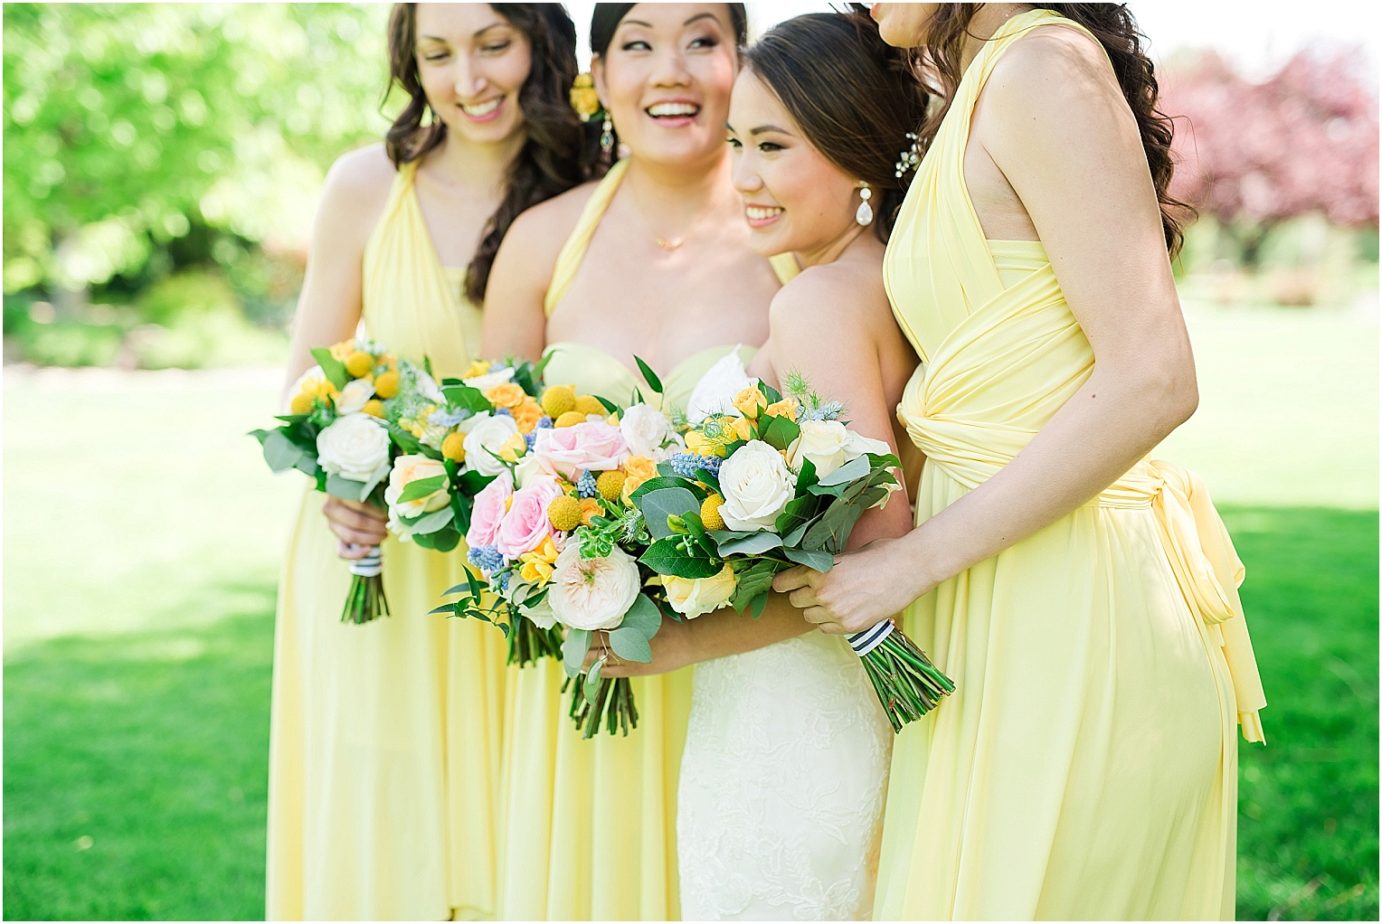 Favorite wedding flowers of 2017 For brides yellow and pink wedding flowers